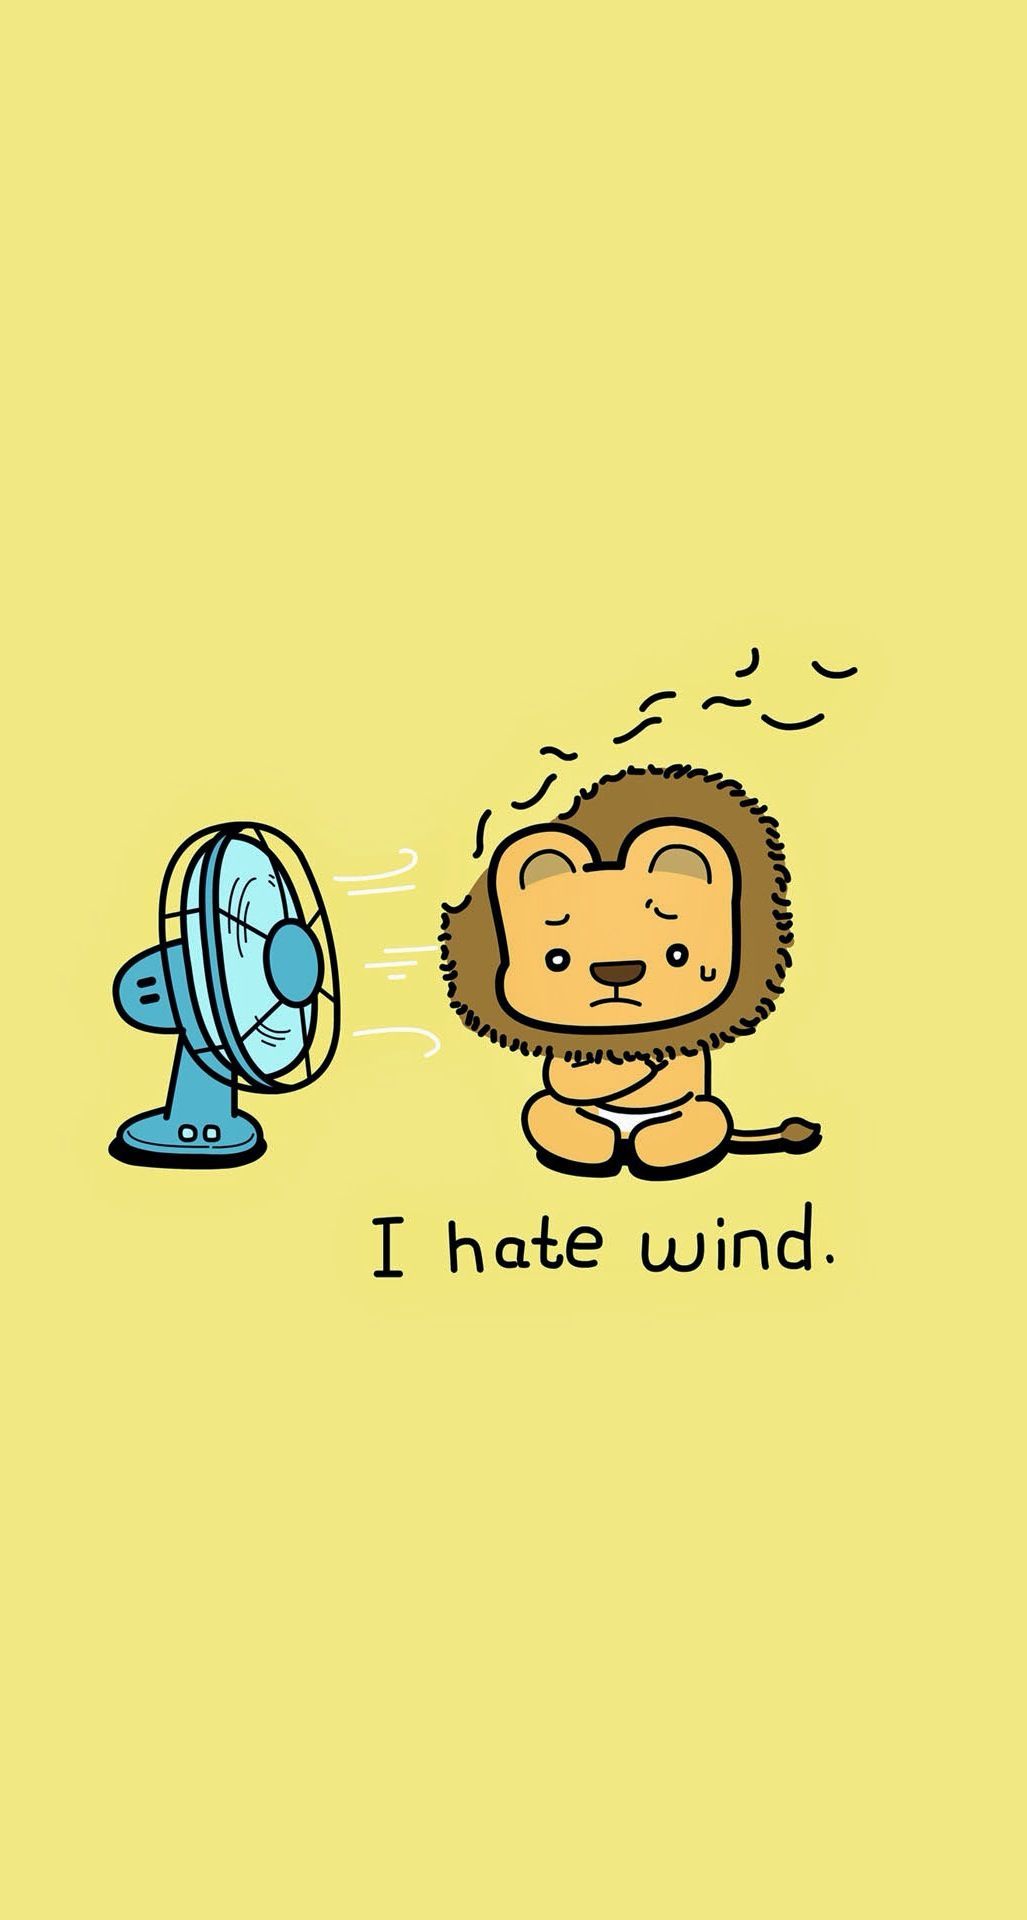 Lion hates wind. Haha! Tap for more Cute Wildlife Animals Cartoon